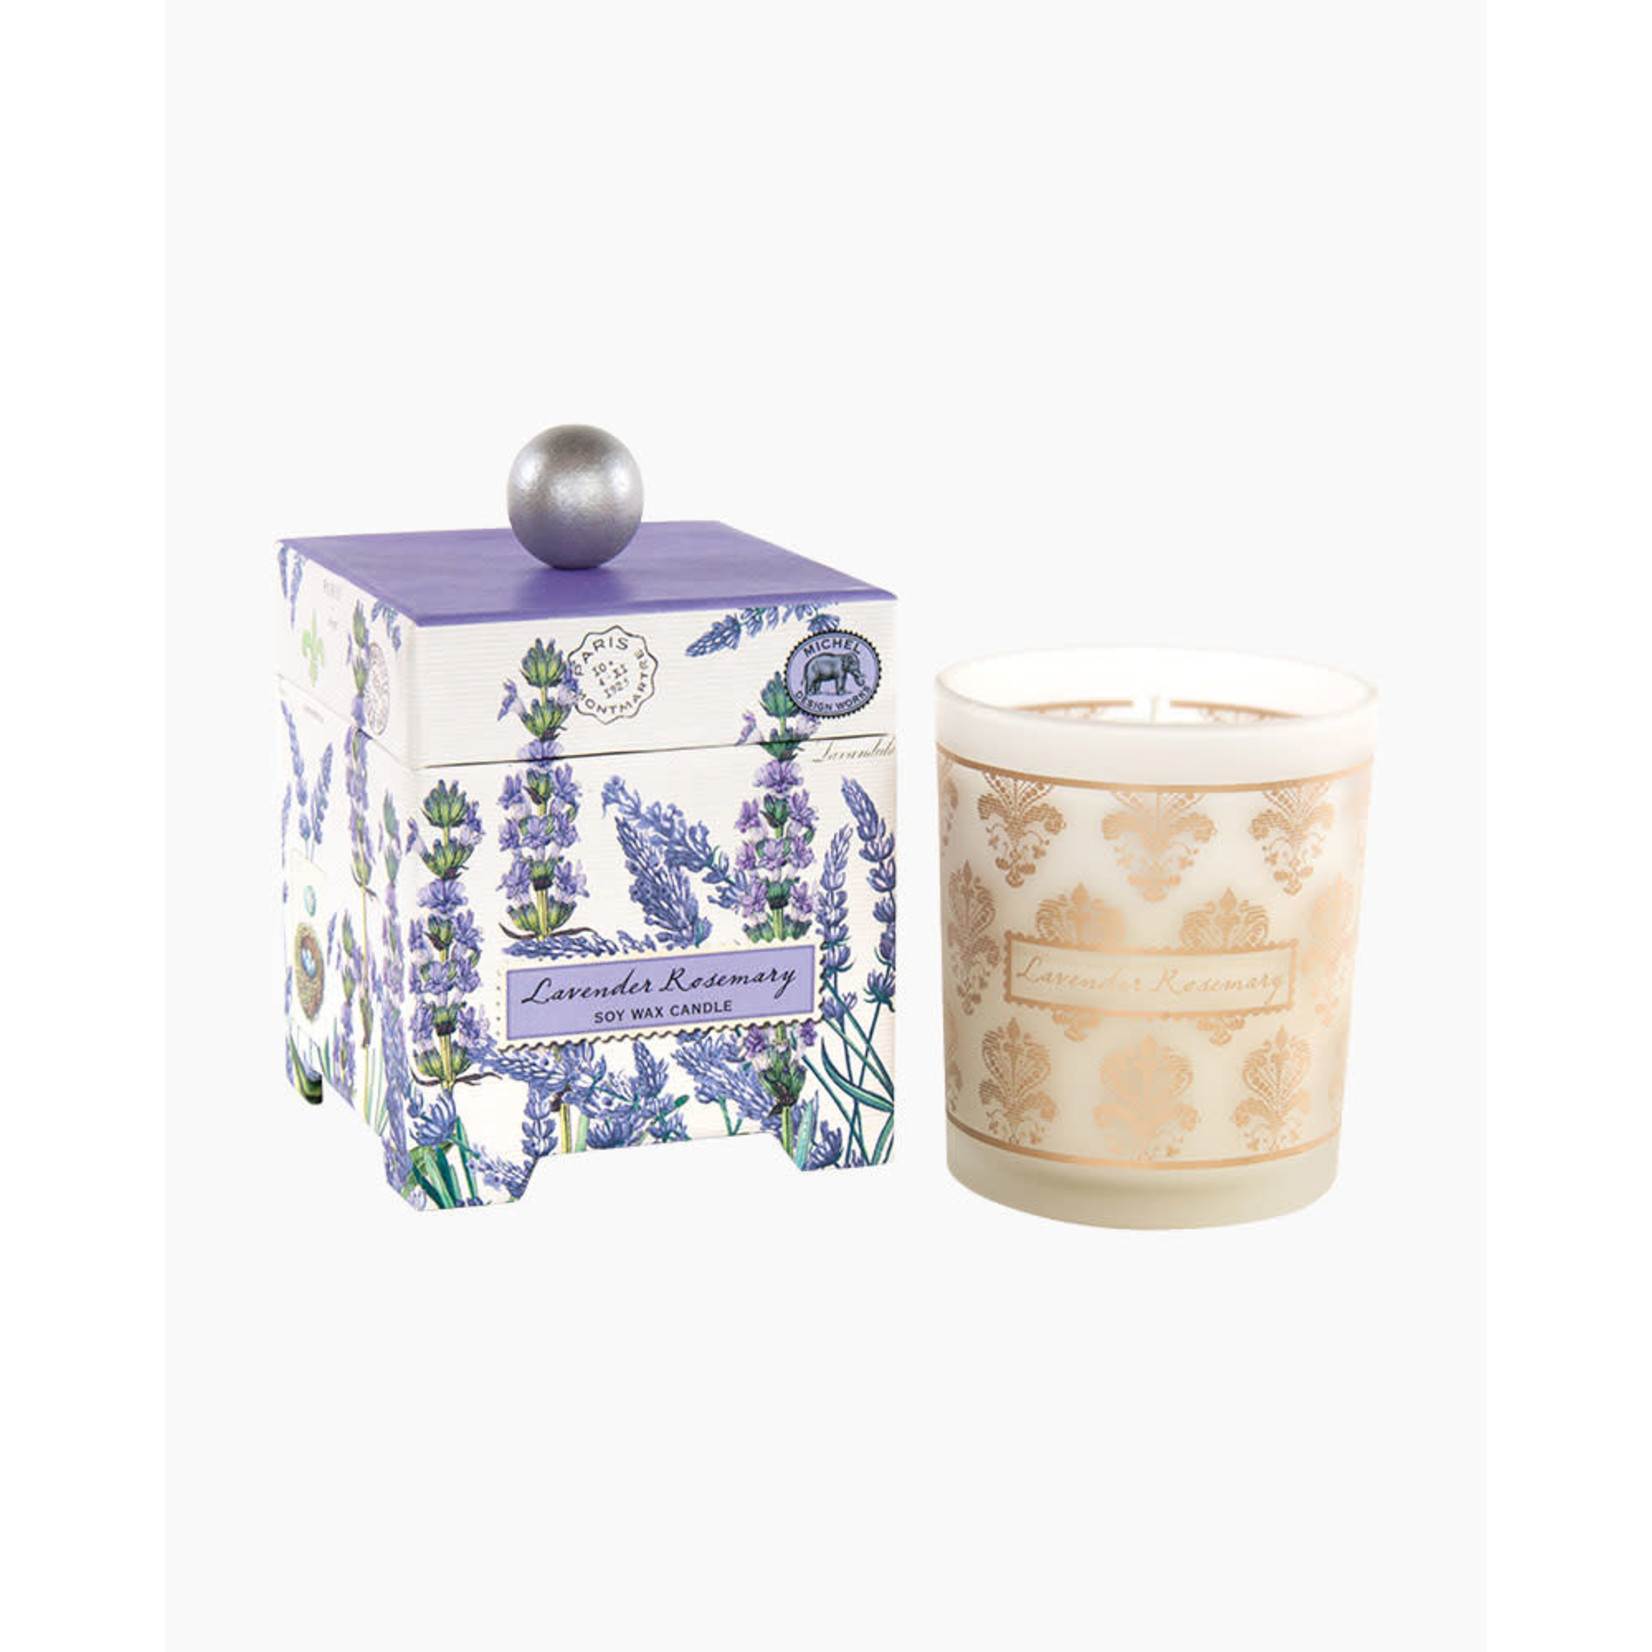 MICHELE DESIGN WORKS LAVENDER ROSEMARY SOY CANDLE